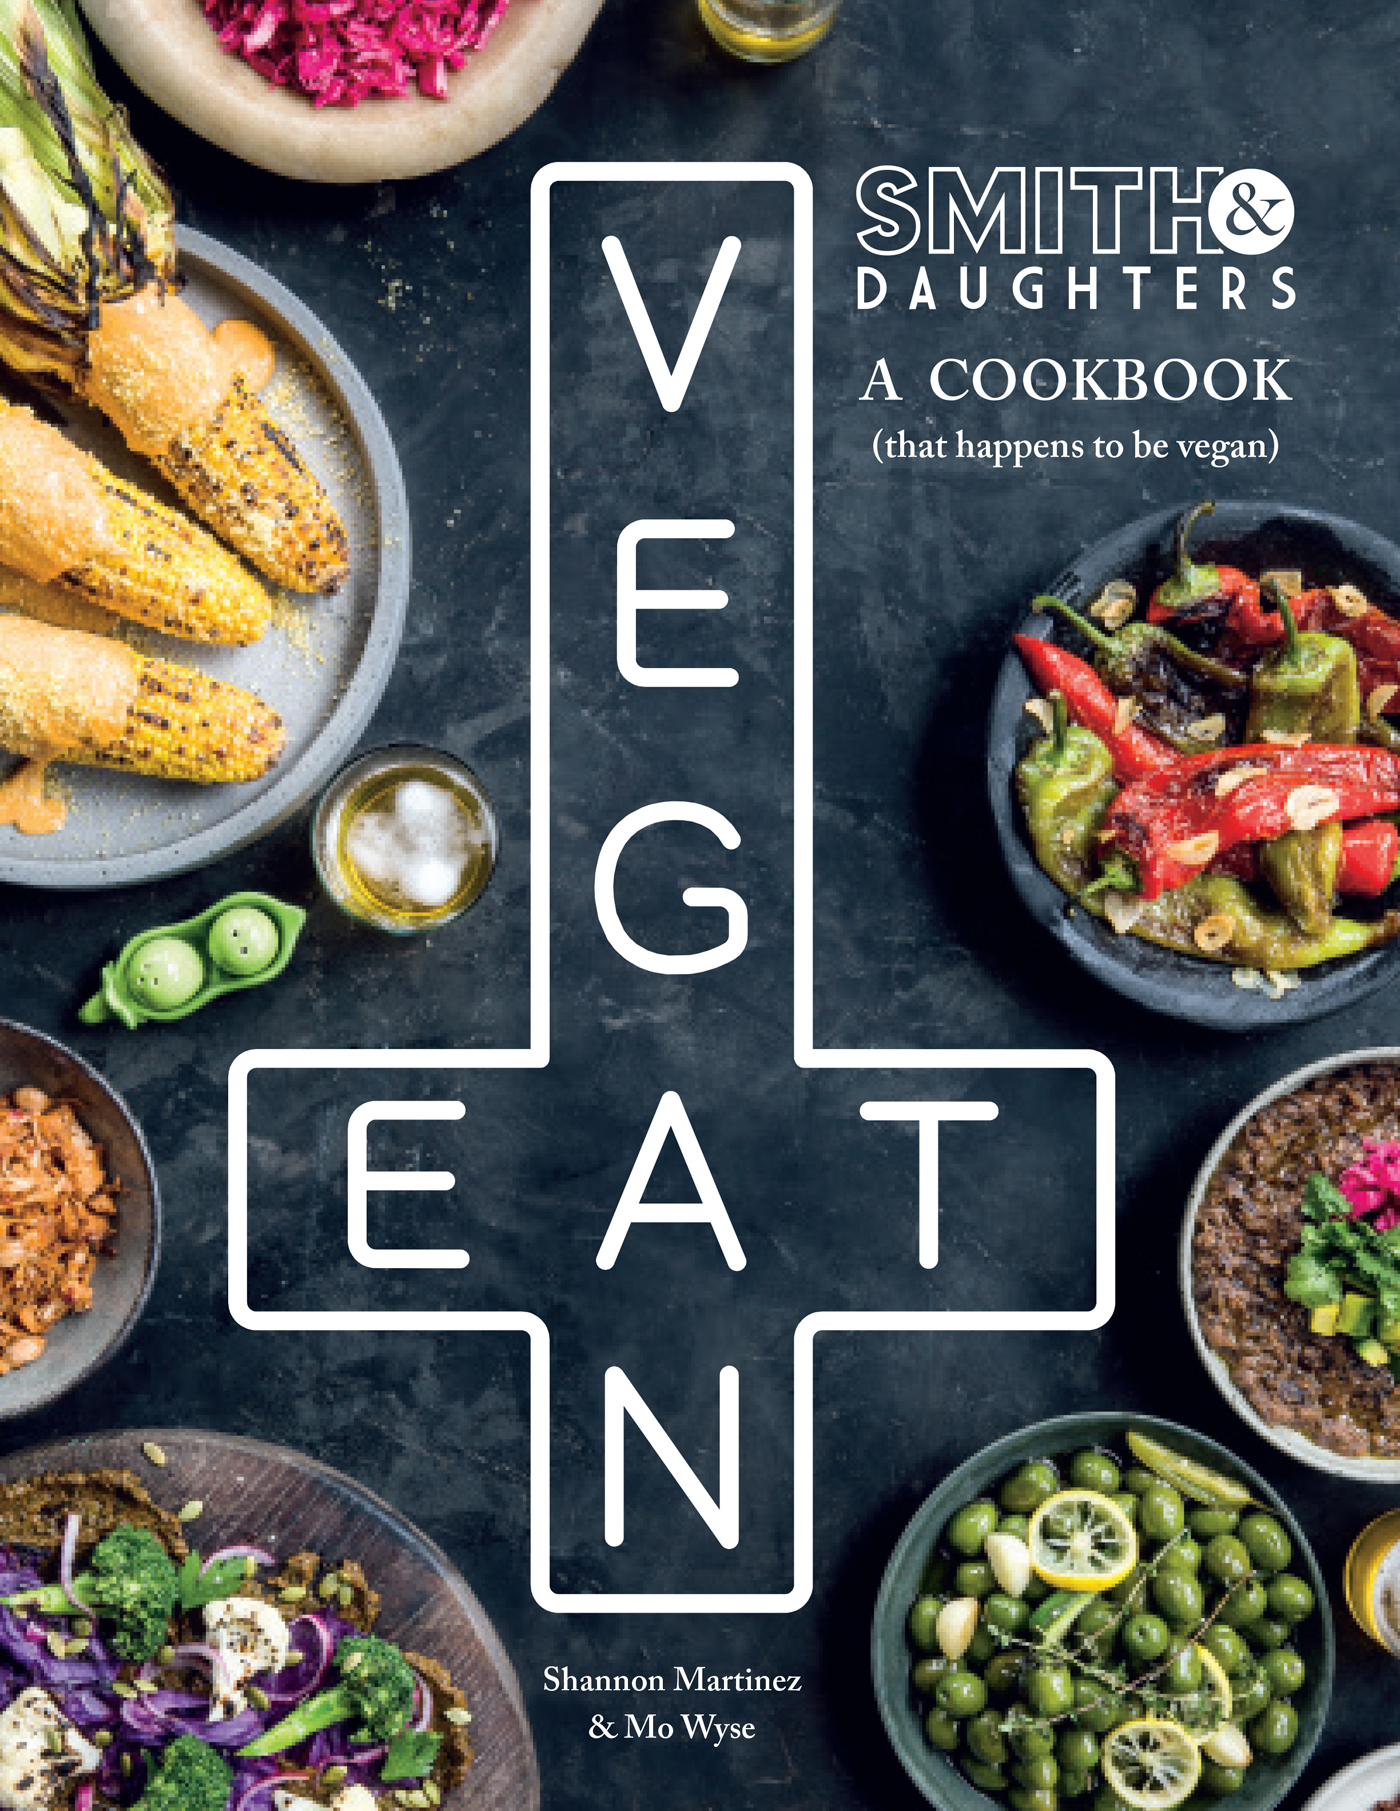 Smith daughters a cookbook that happens to be vegan - photo 1